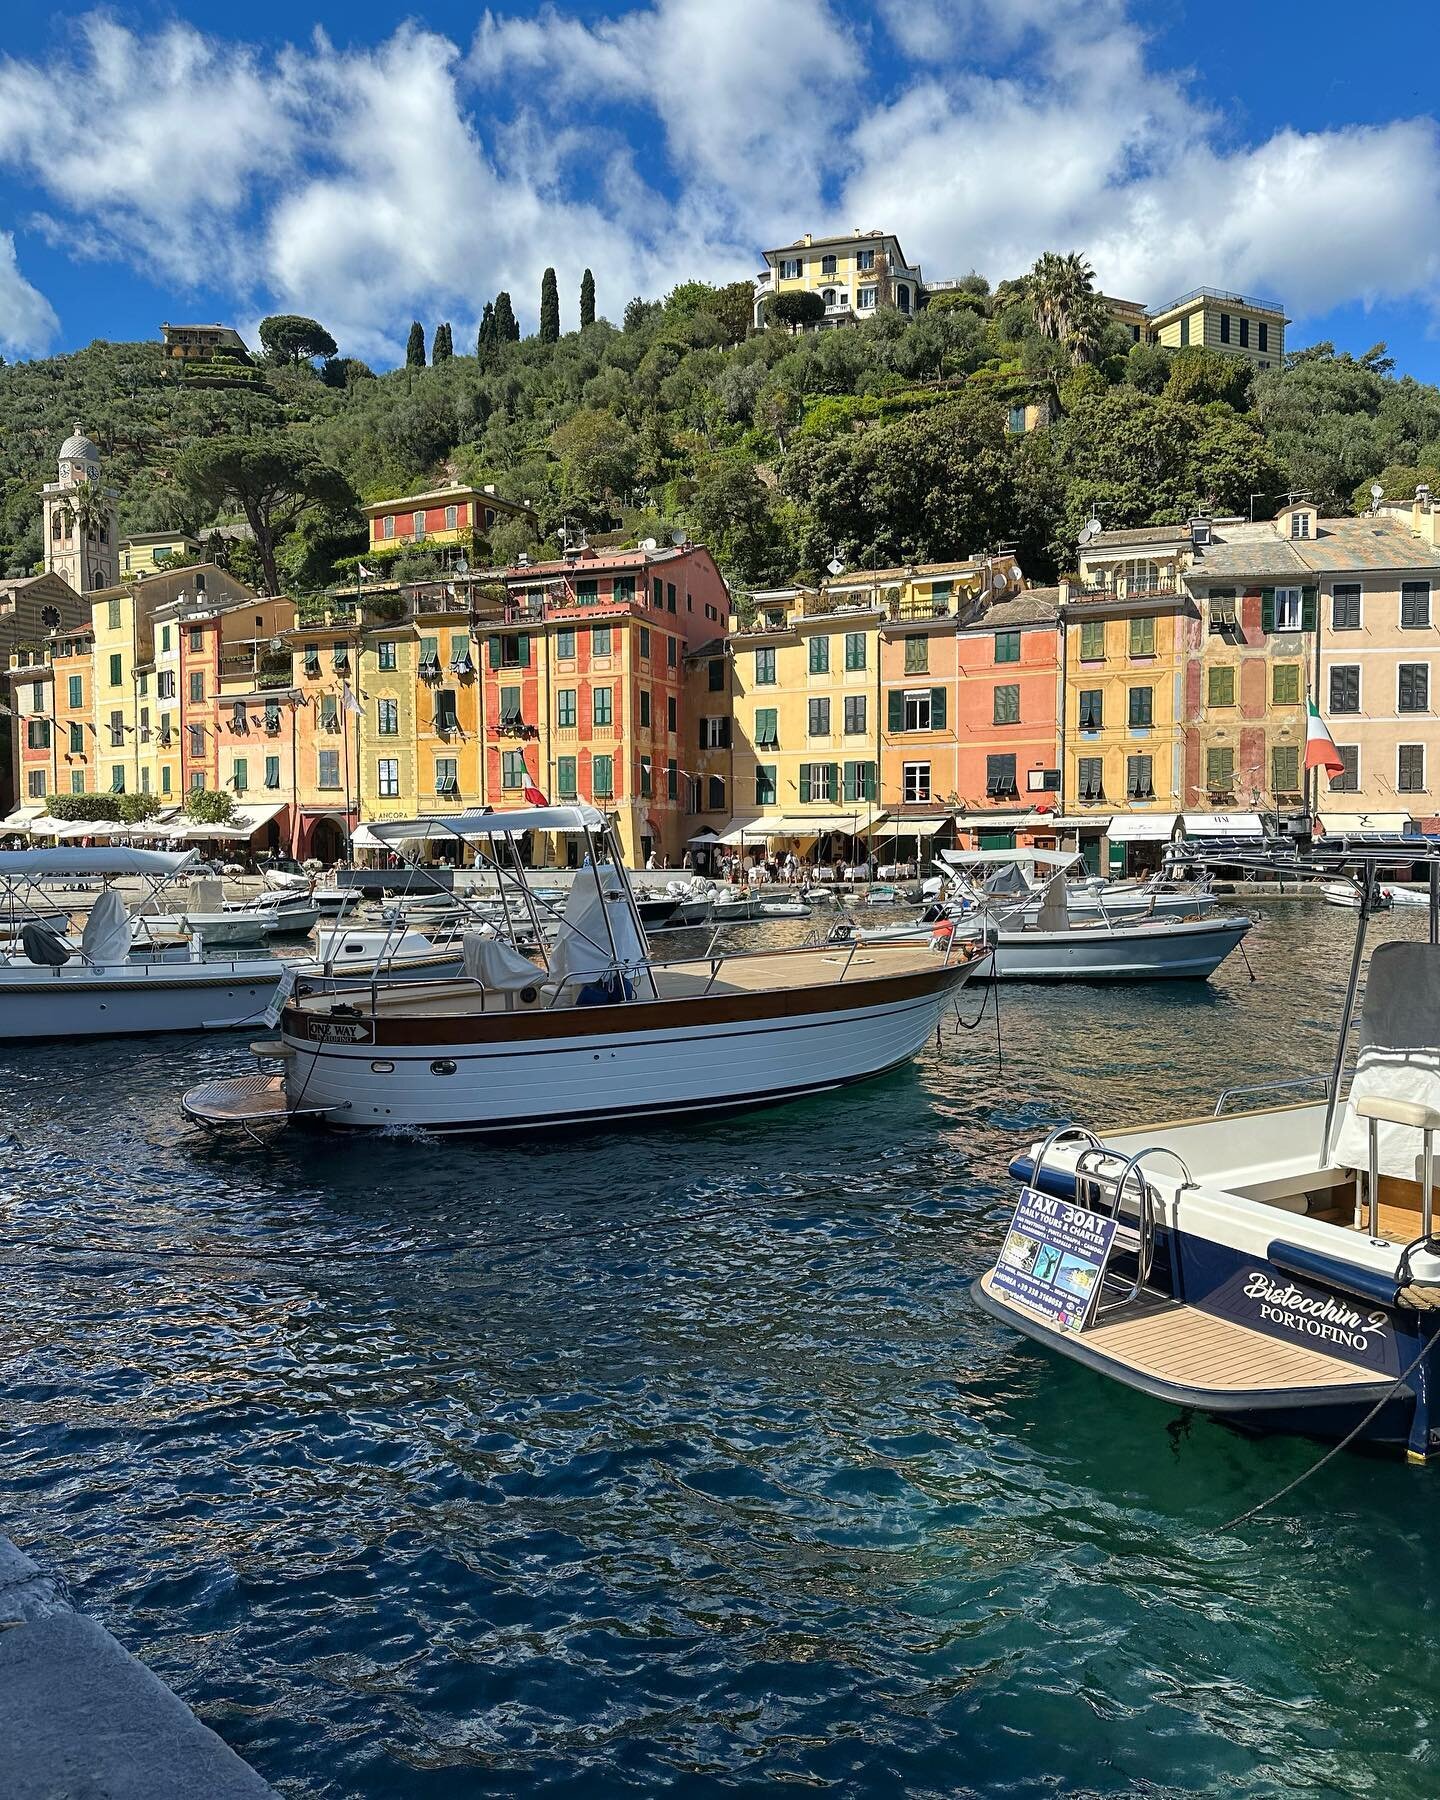 We took an excursion to Portofino&hellip;it&rsquo;s glamor and beauty exceeded my expectations and did not disappoint&hellip;